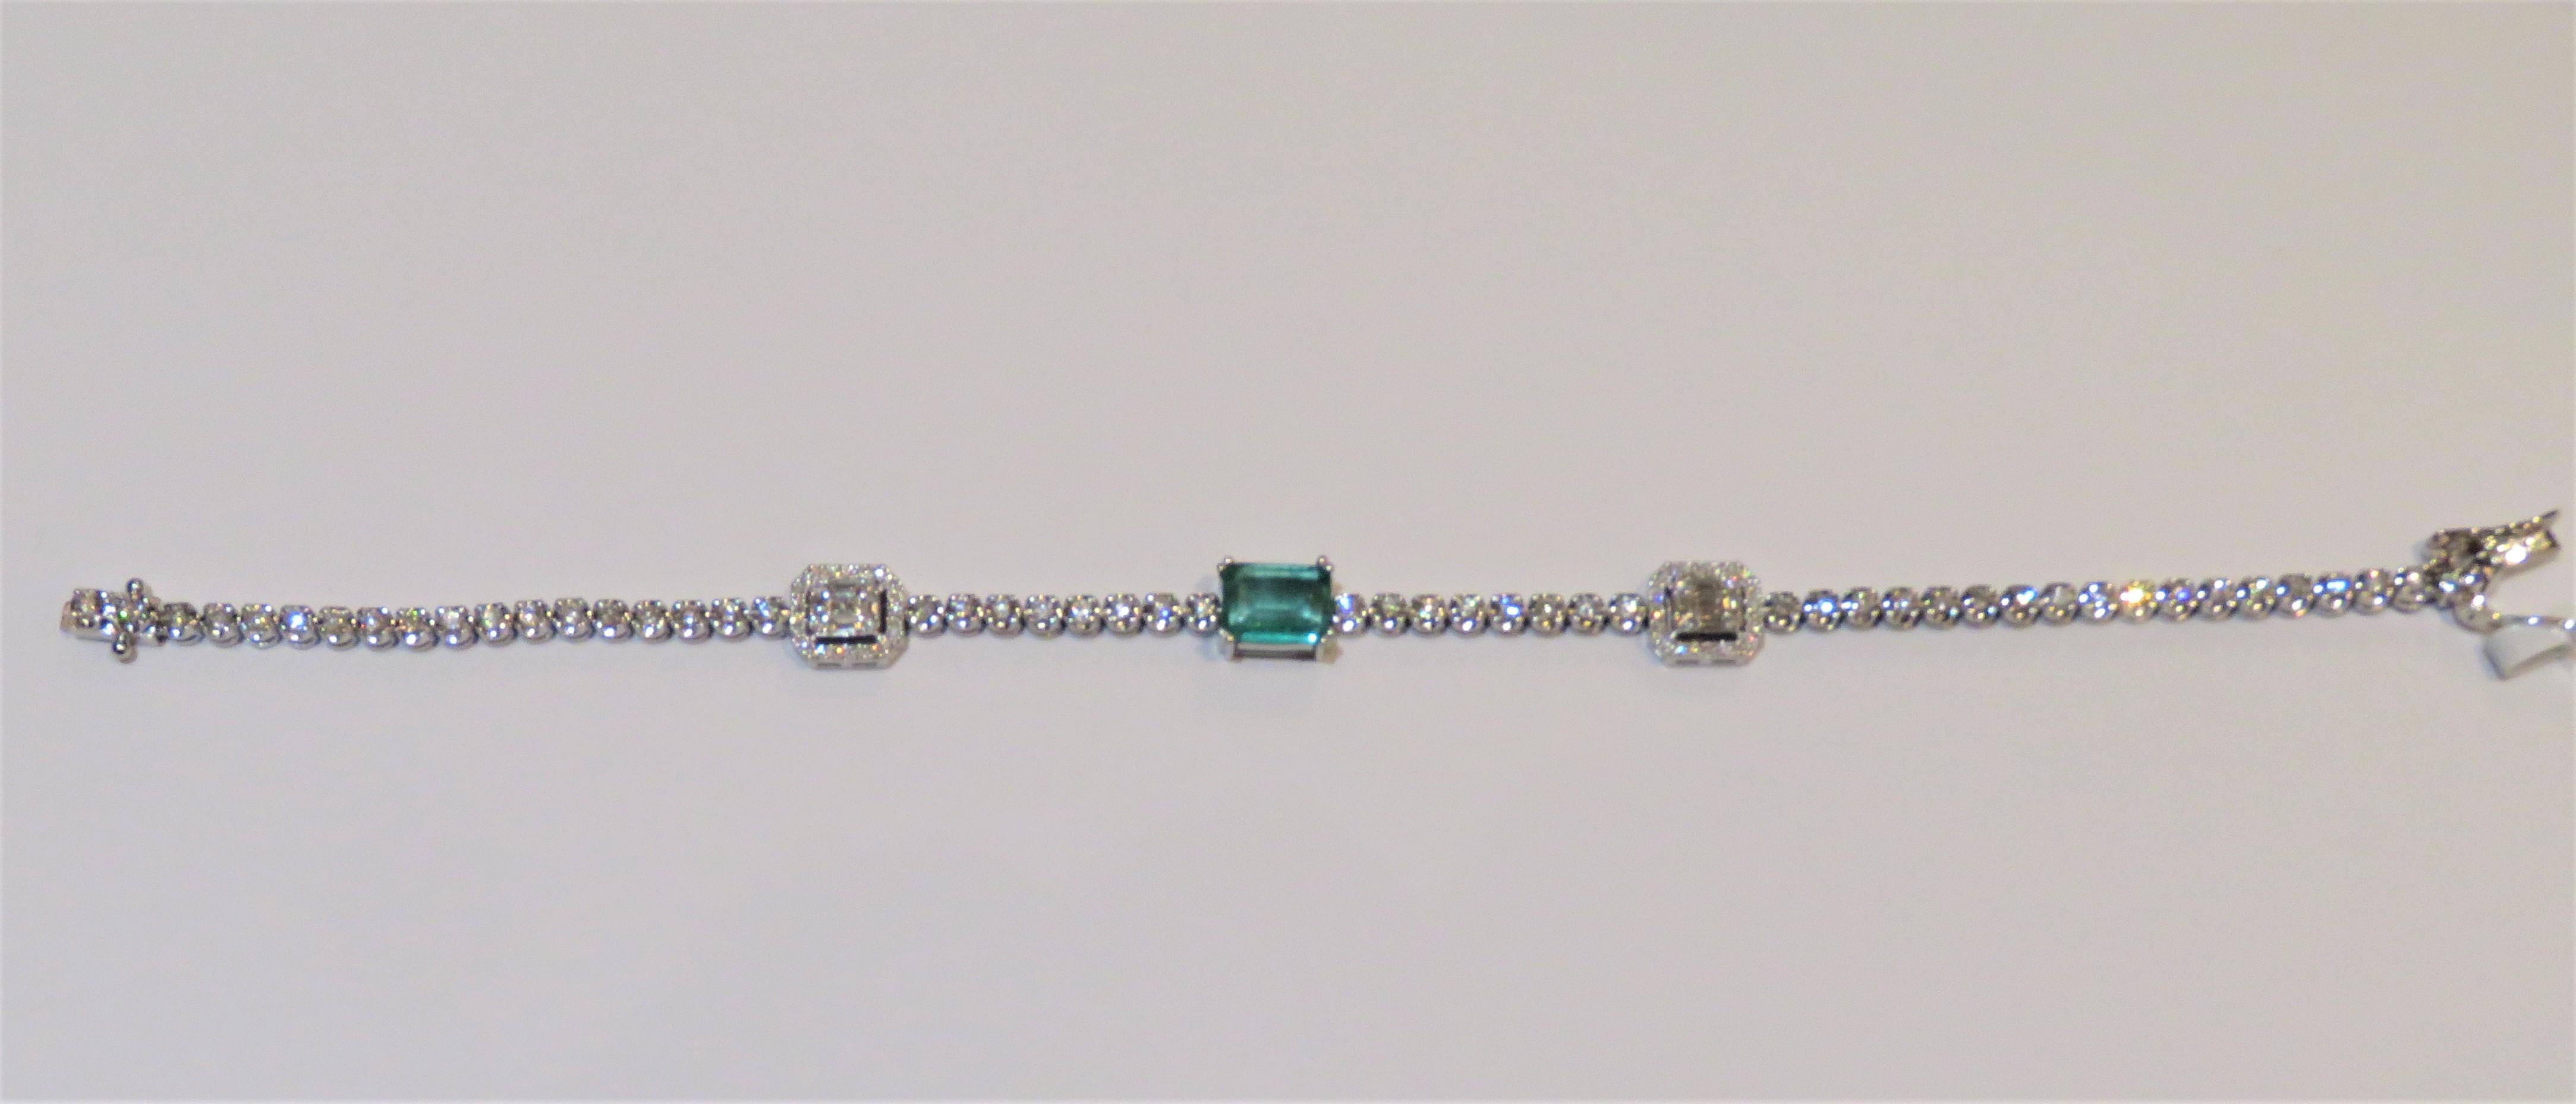 The Following Item we are offering is this Rare Important Radiant 18KT Gold Gorgeous Glittering and Sparkling Magnificent Fancy Shaped Green Emerald and Diamond Bracelet. Bracelet Contains approx 3CTS of Beautiful Fancy Emerald Cut Green Emerald and